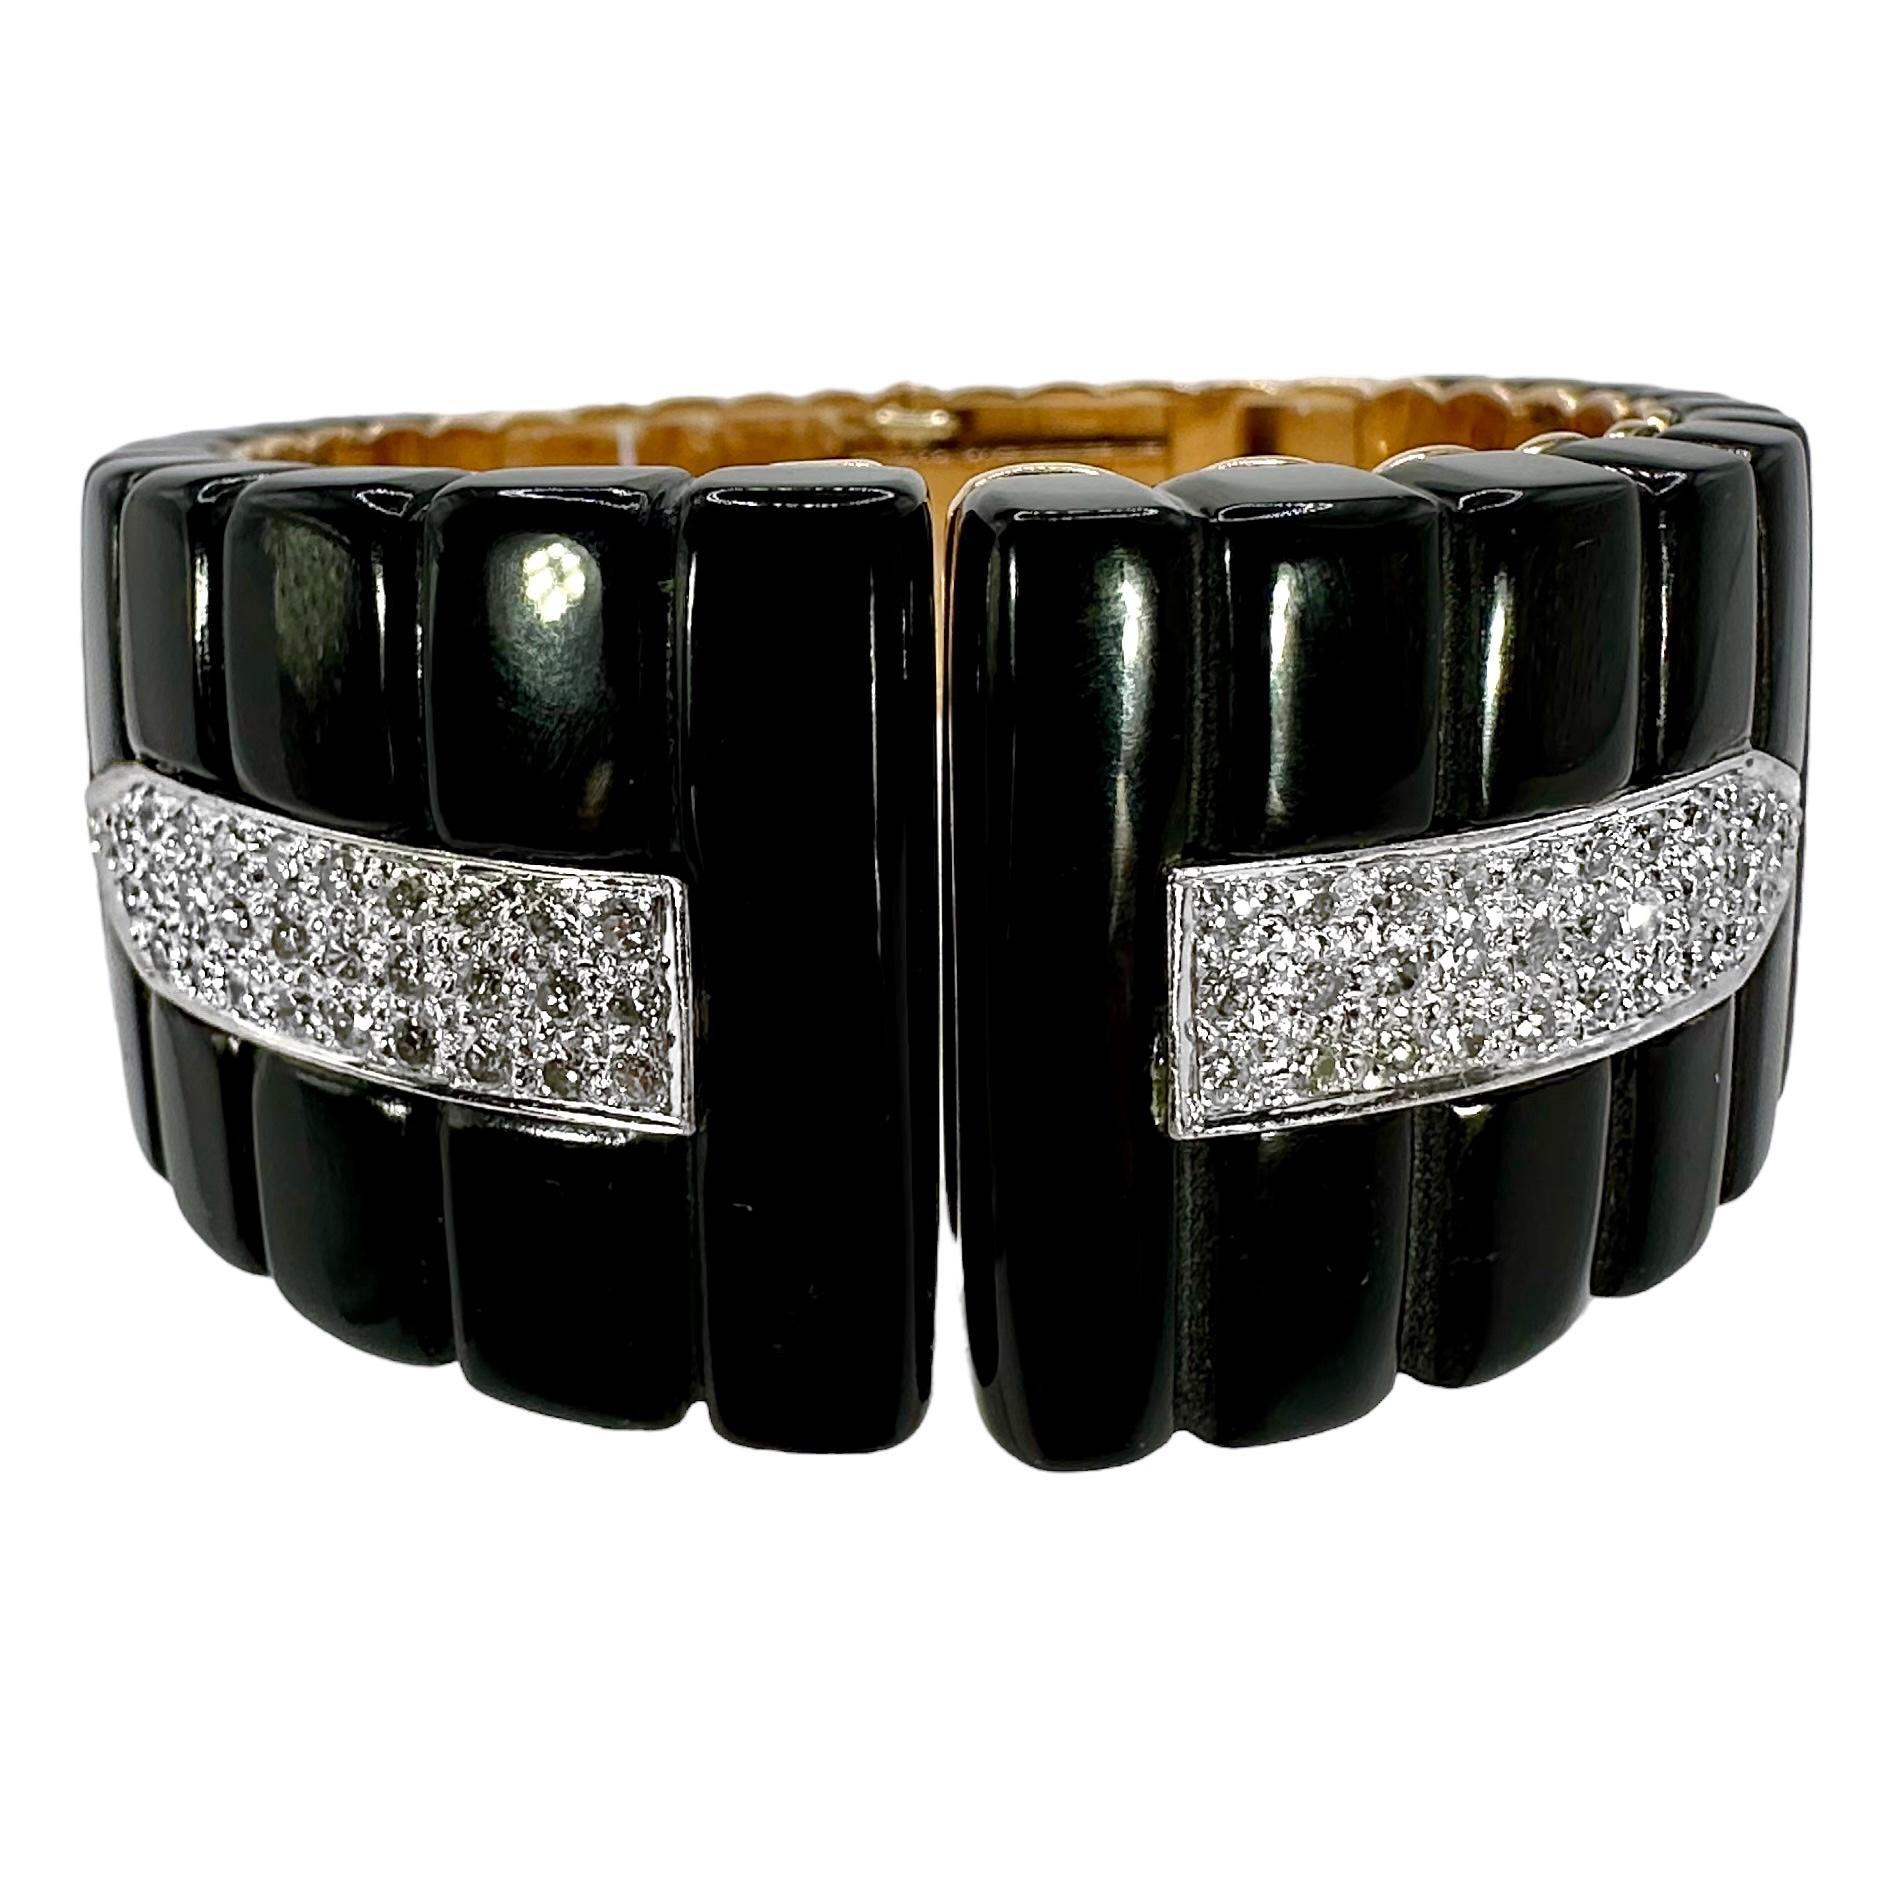 This tailored, stylish, and precision crafted 14k yellow gold, black onyx and diamond cuff bracelet embodies high fashion and quality in every respect. All gold work is done to the highest jewelry making standards. Two large black onyx panels are